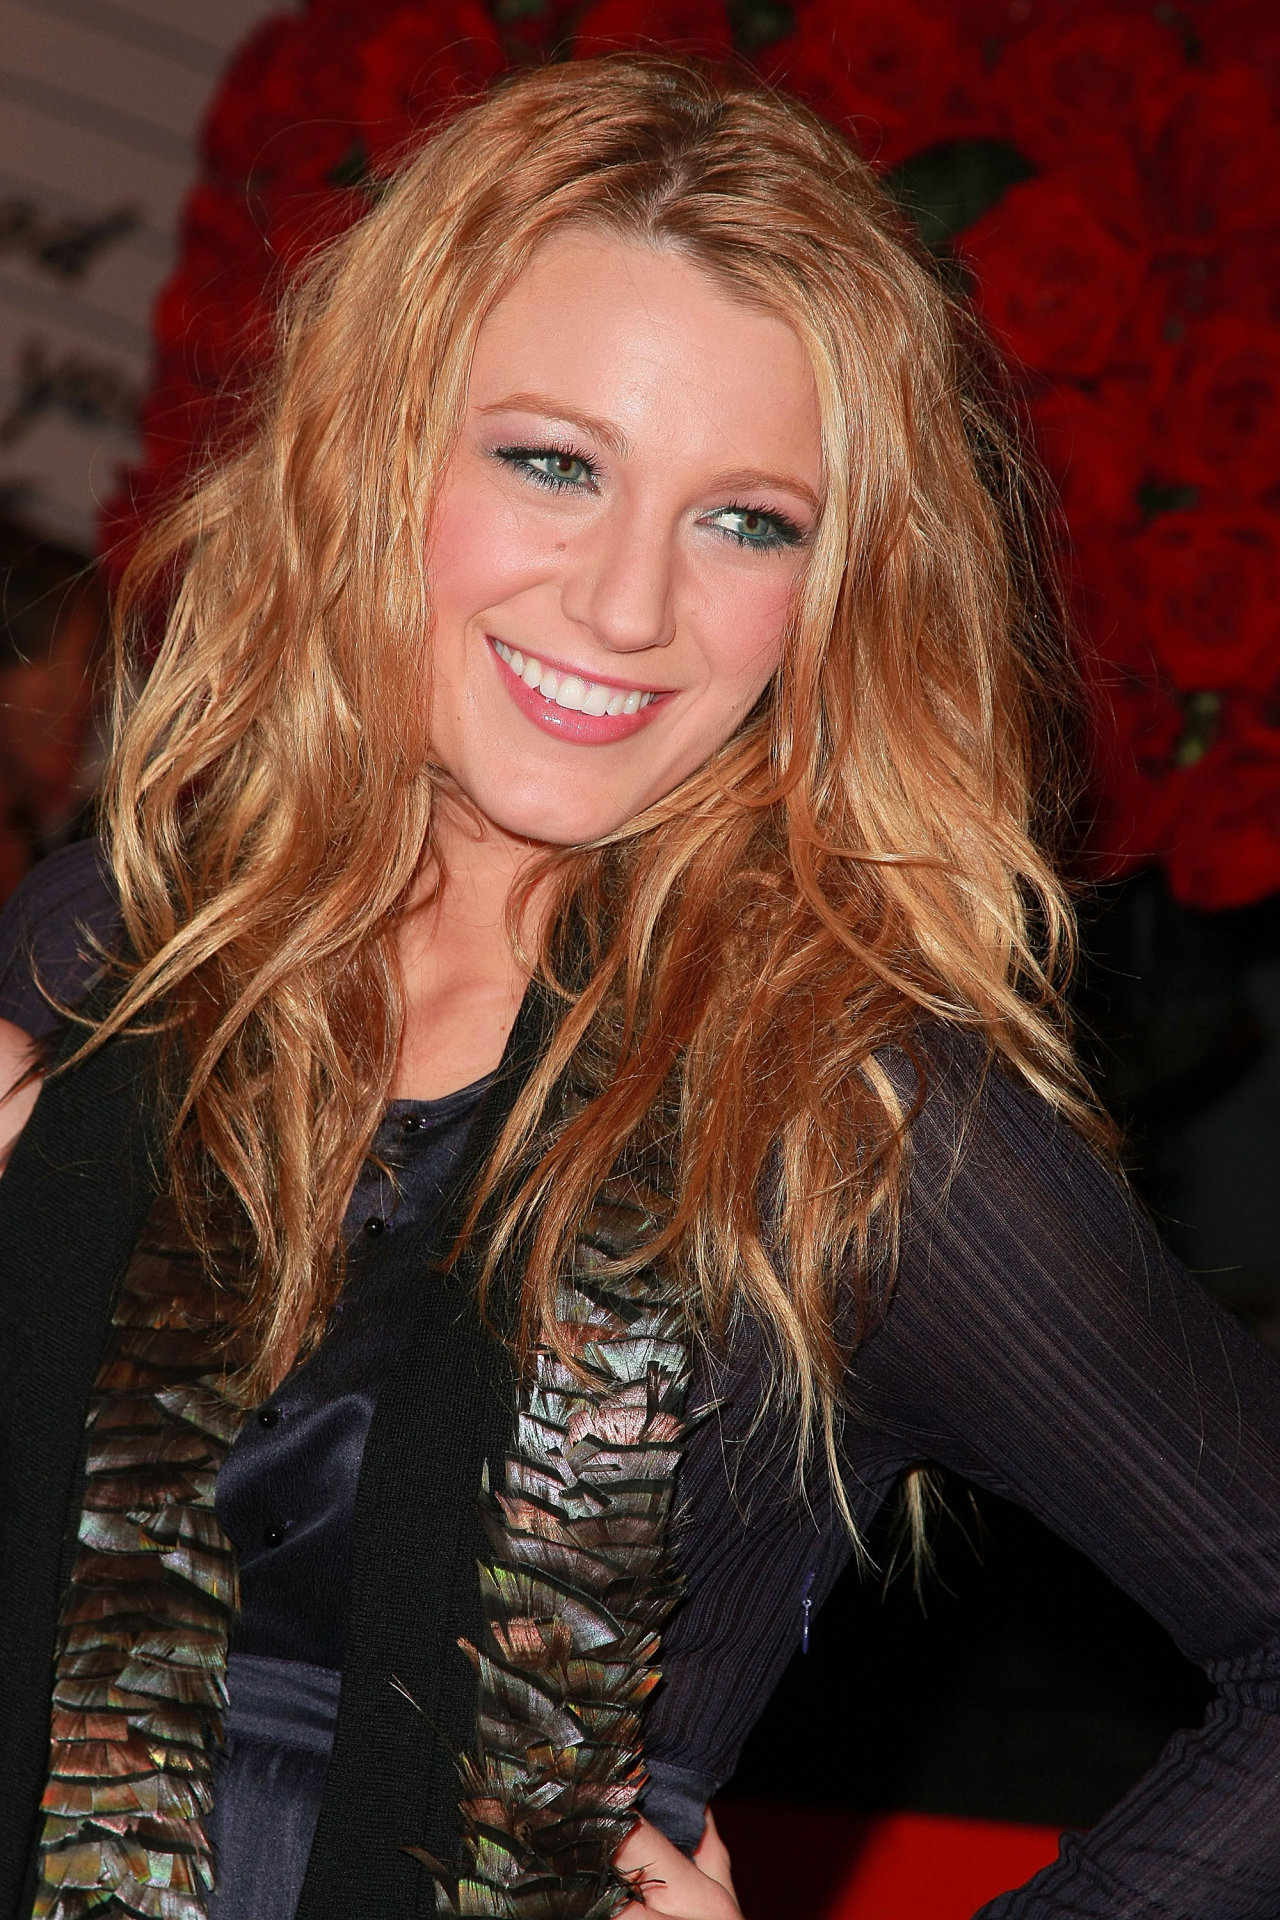 Blake Lively leaked wallpapers